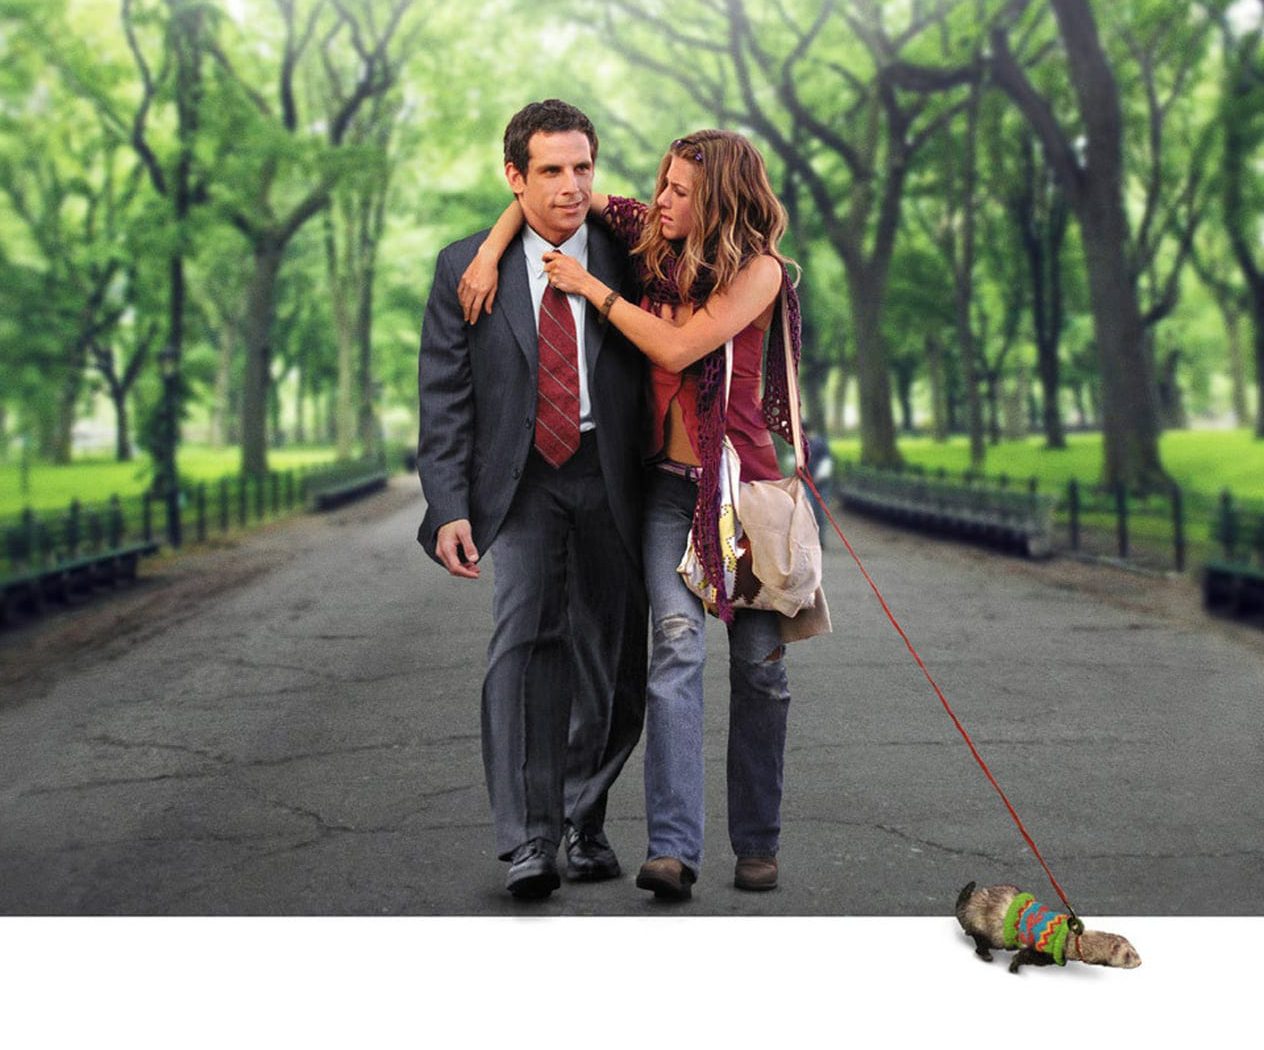 Poster for the movie "Along Came Polly"